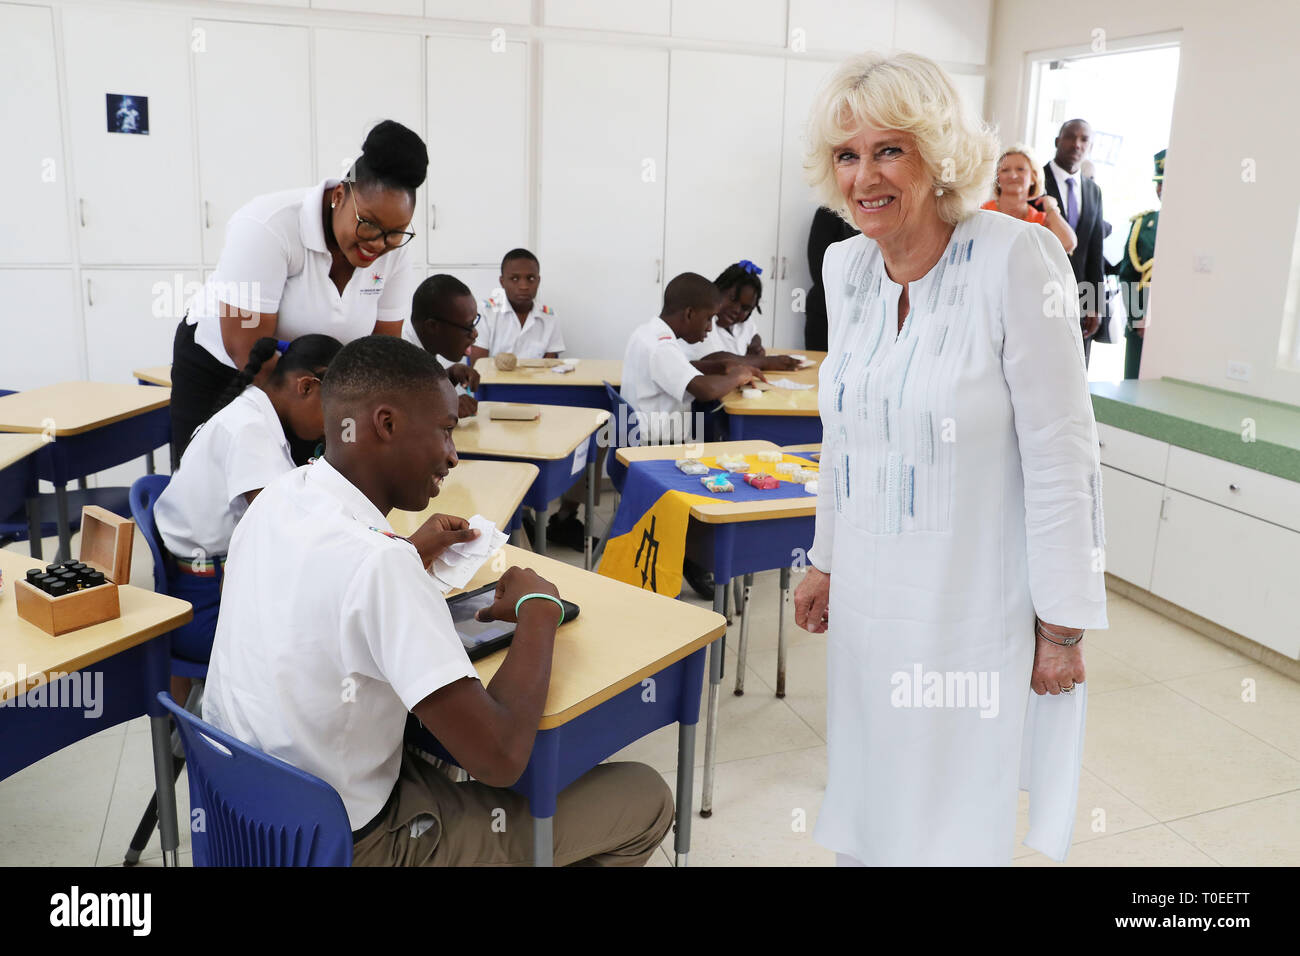 The Duchess of Cornwall meets staff and pupils as she attends a Big Lunch event at the Derrick Smith School, Jackmans, Barbados. Stock Photo